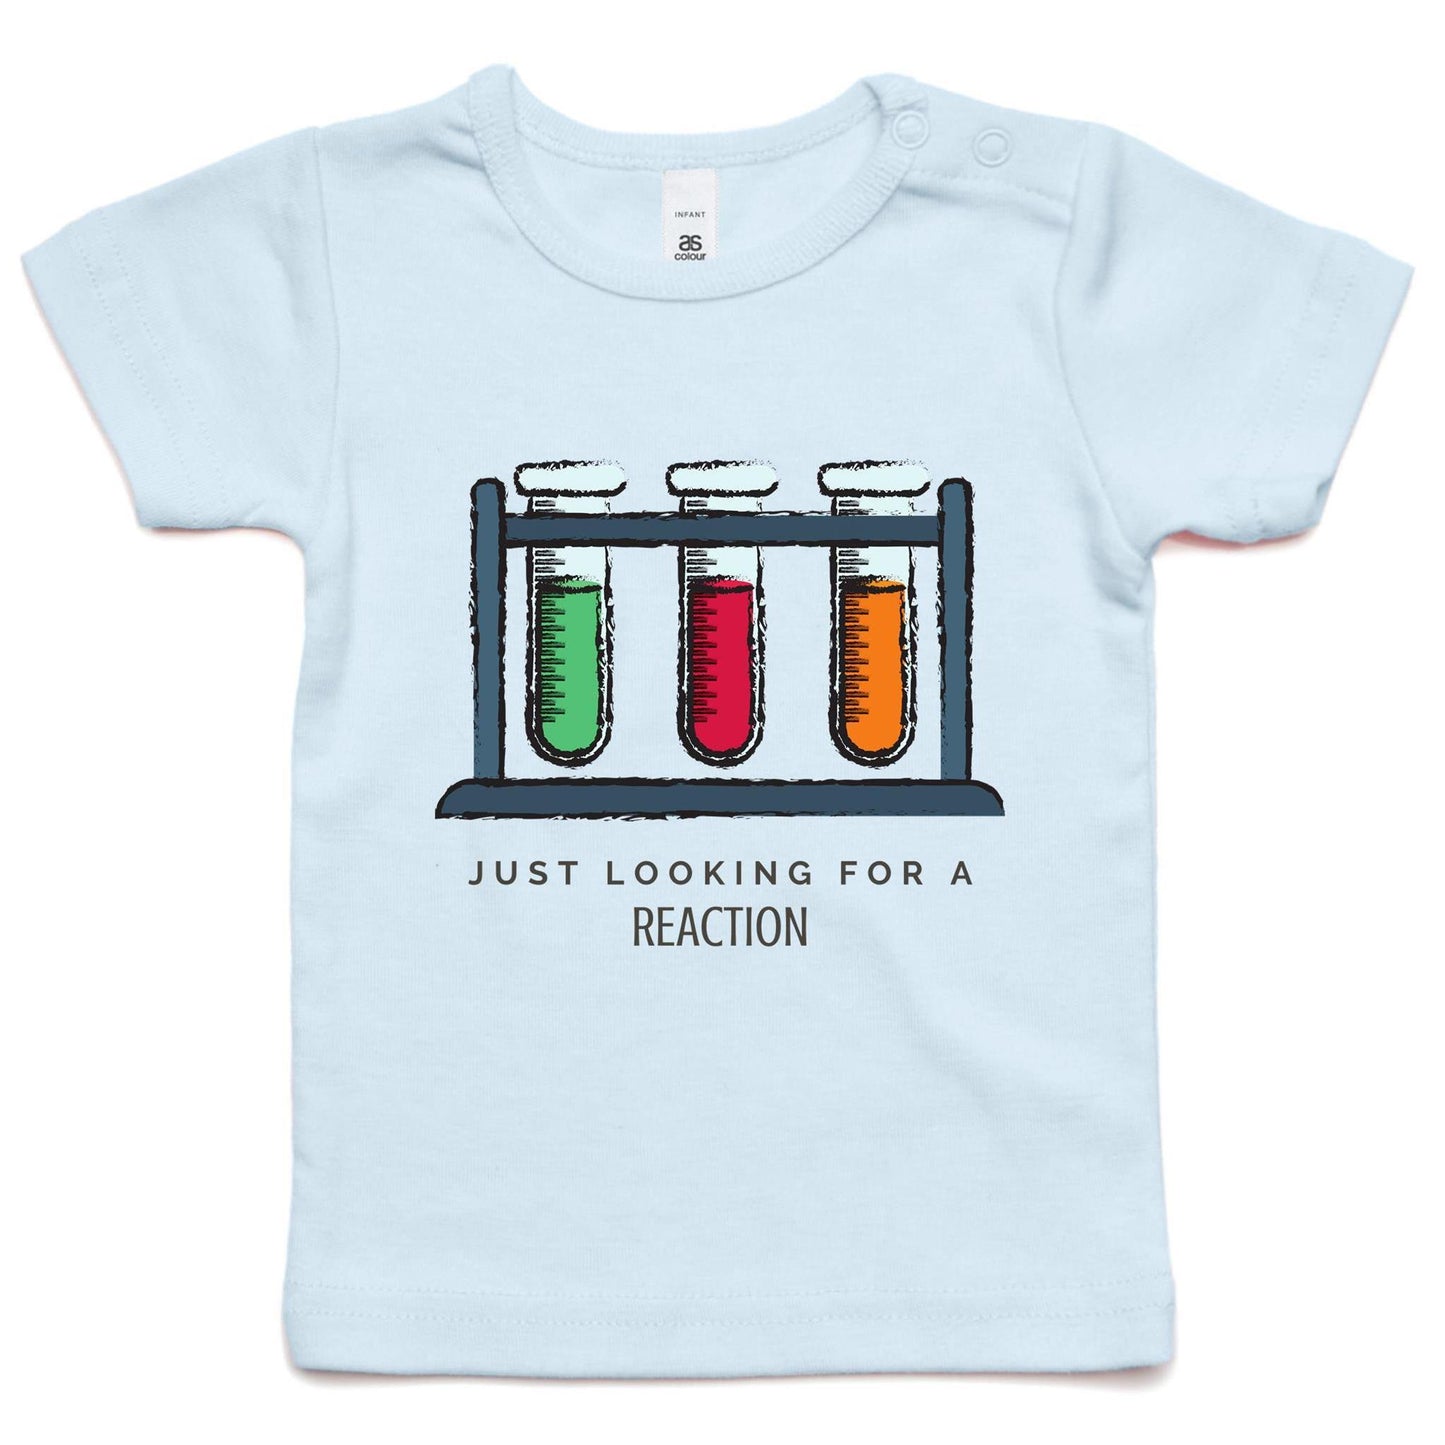 Test Tube, Just Looking For A Reaction - Baby T-shirt Powder Blue Baby T-shirt kids Science